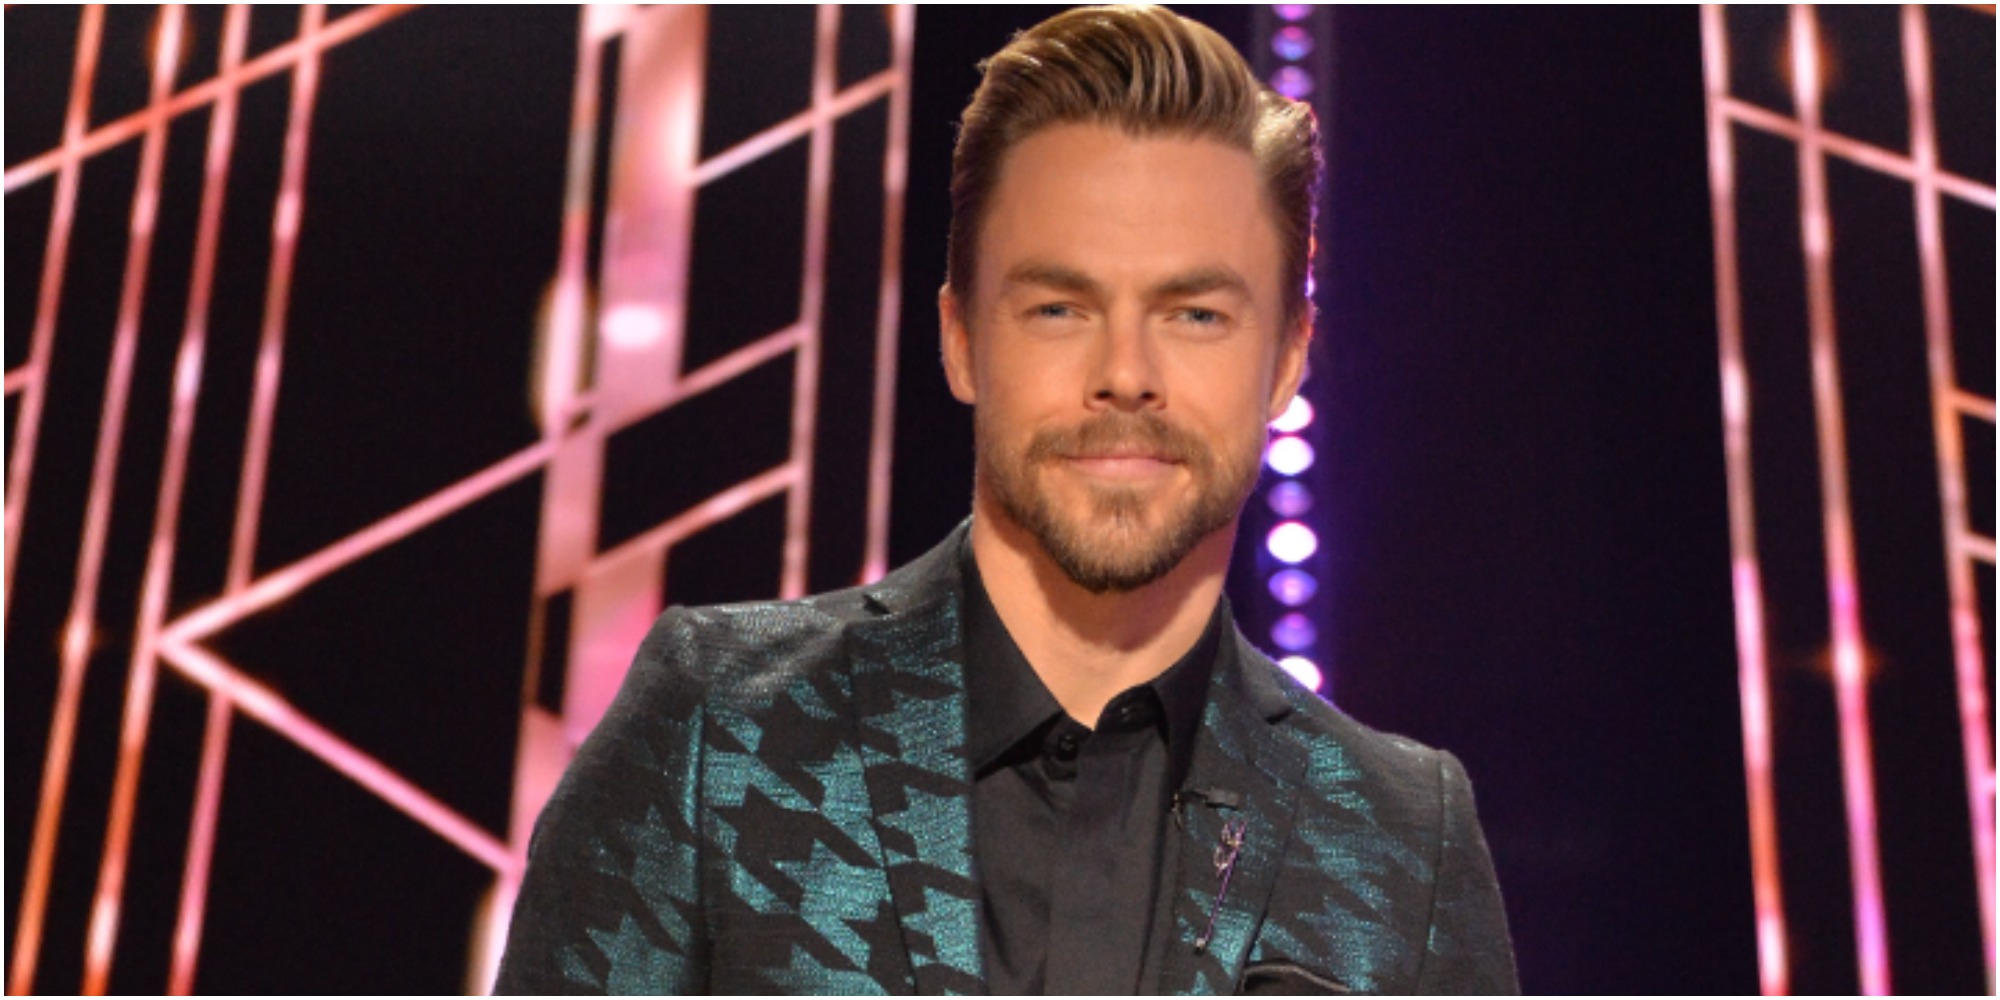 Derek Hough poses on the set of "Dancing with the Stars."